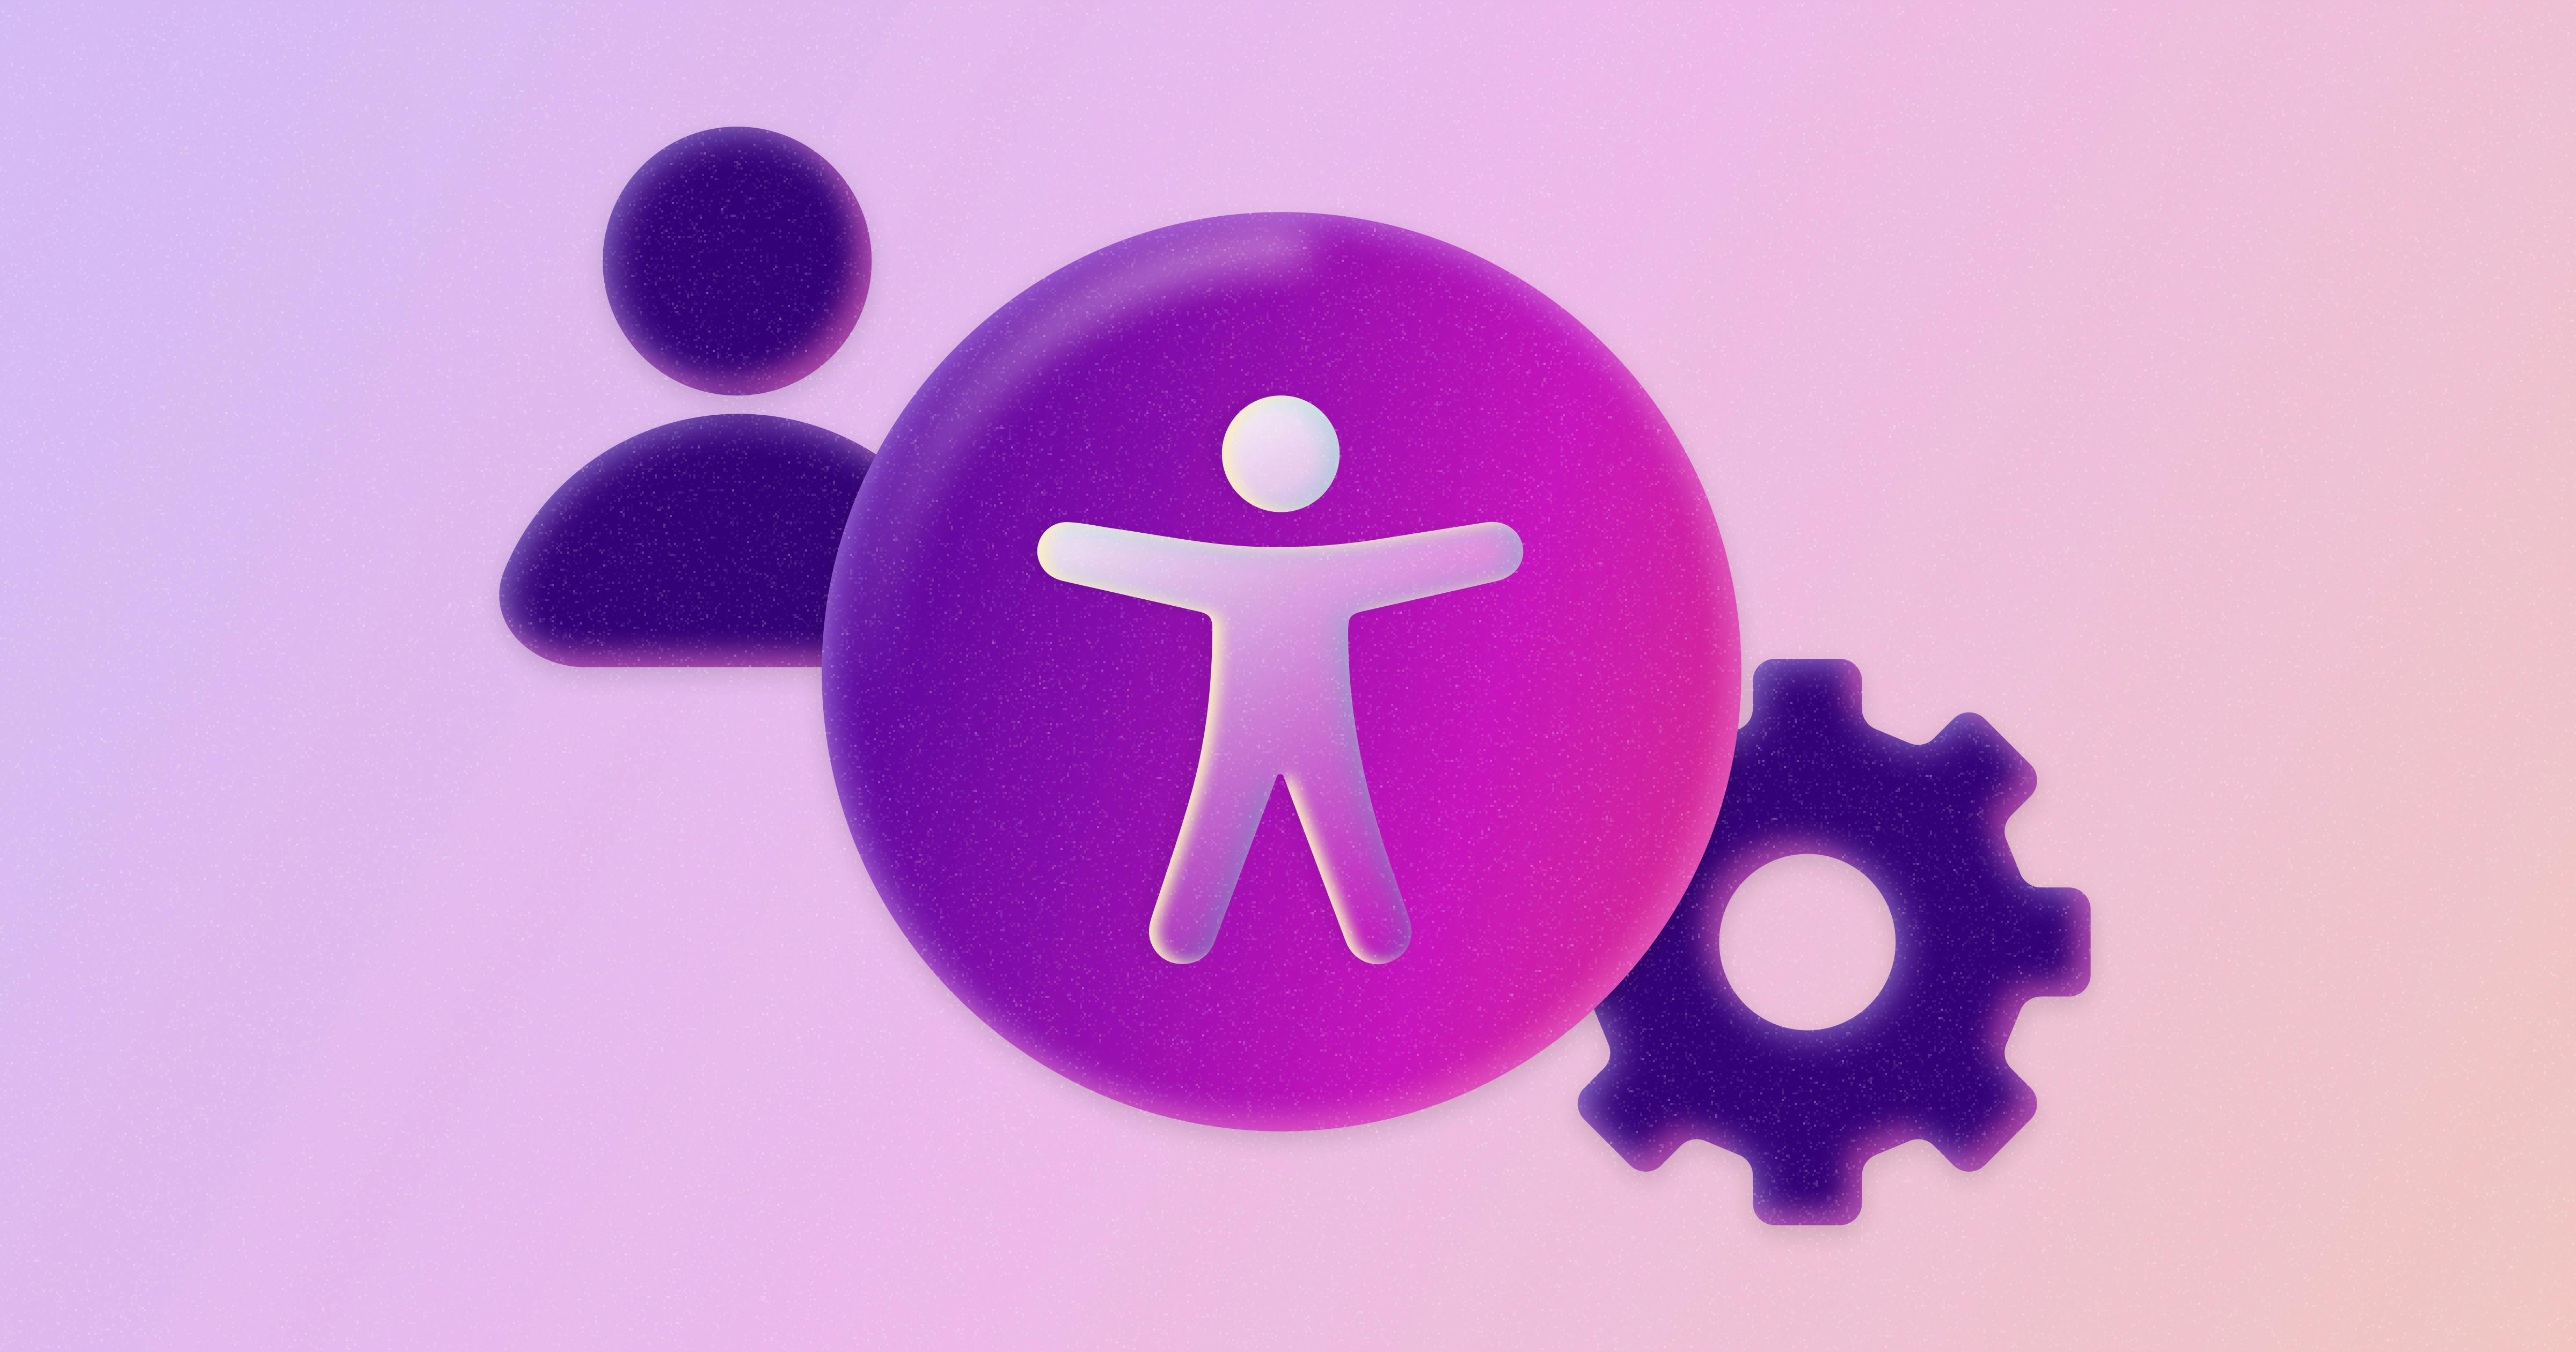 A purple accessibility symbol, with an icon of a person on the left and a gear on the right.